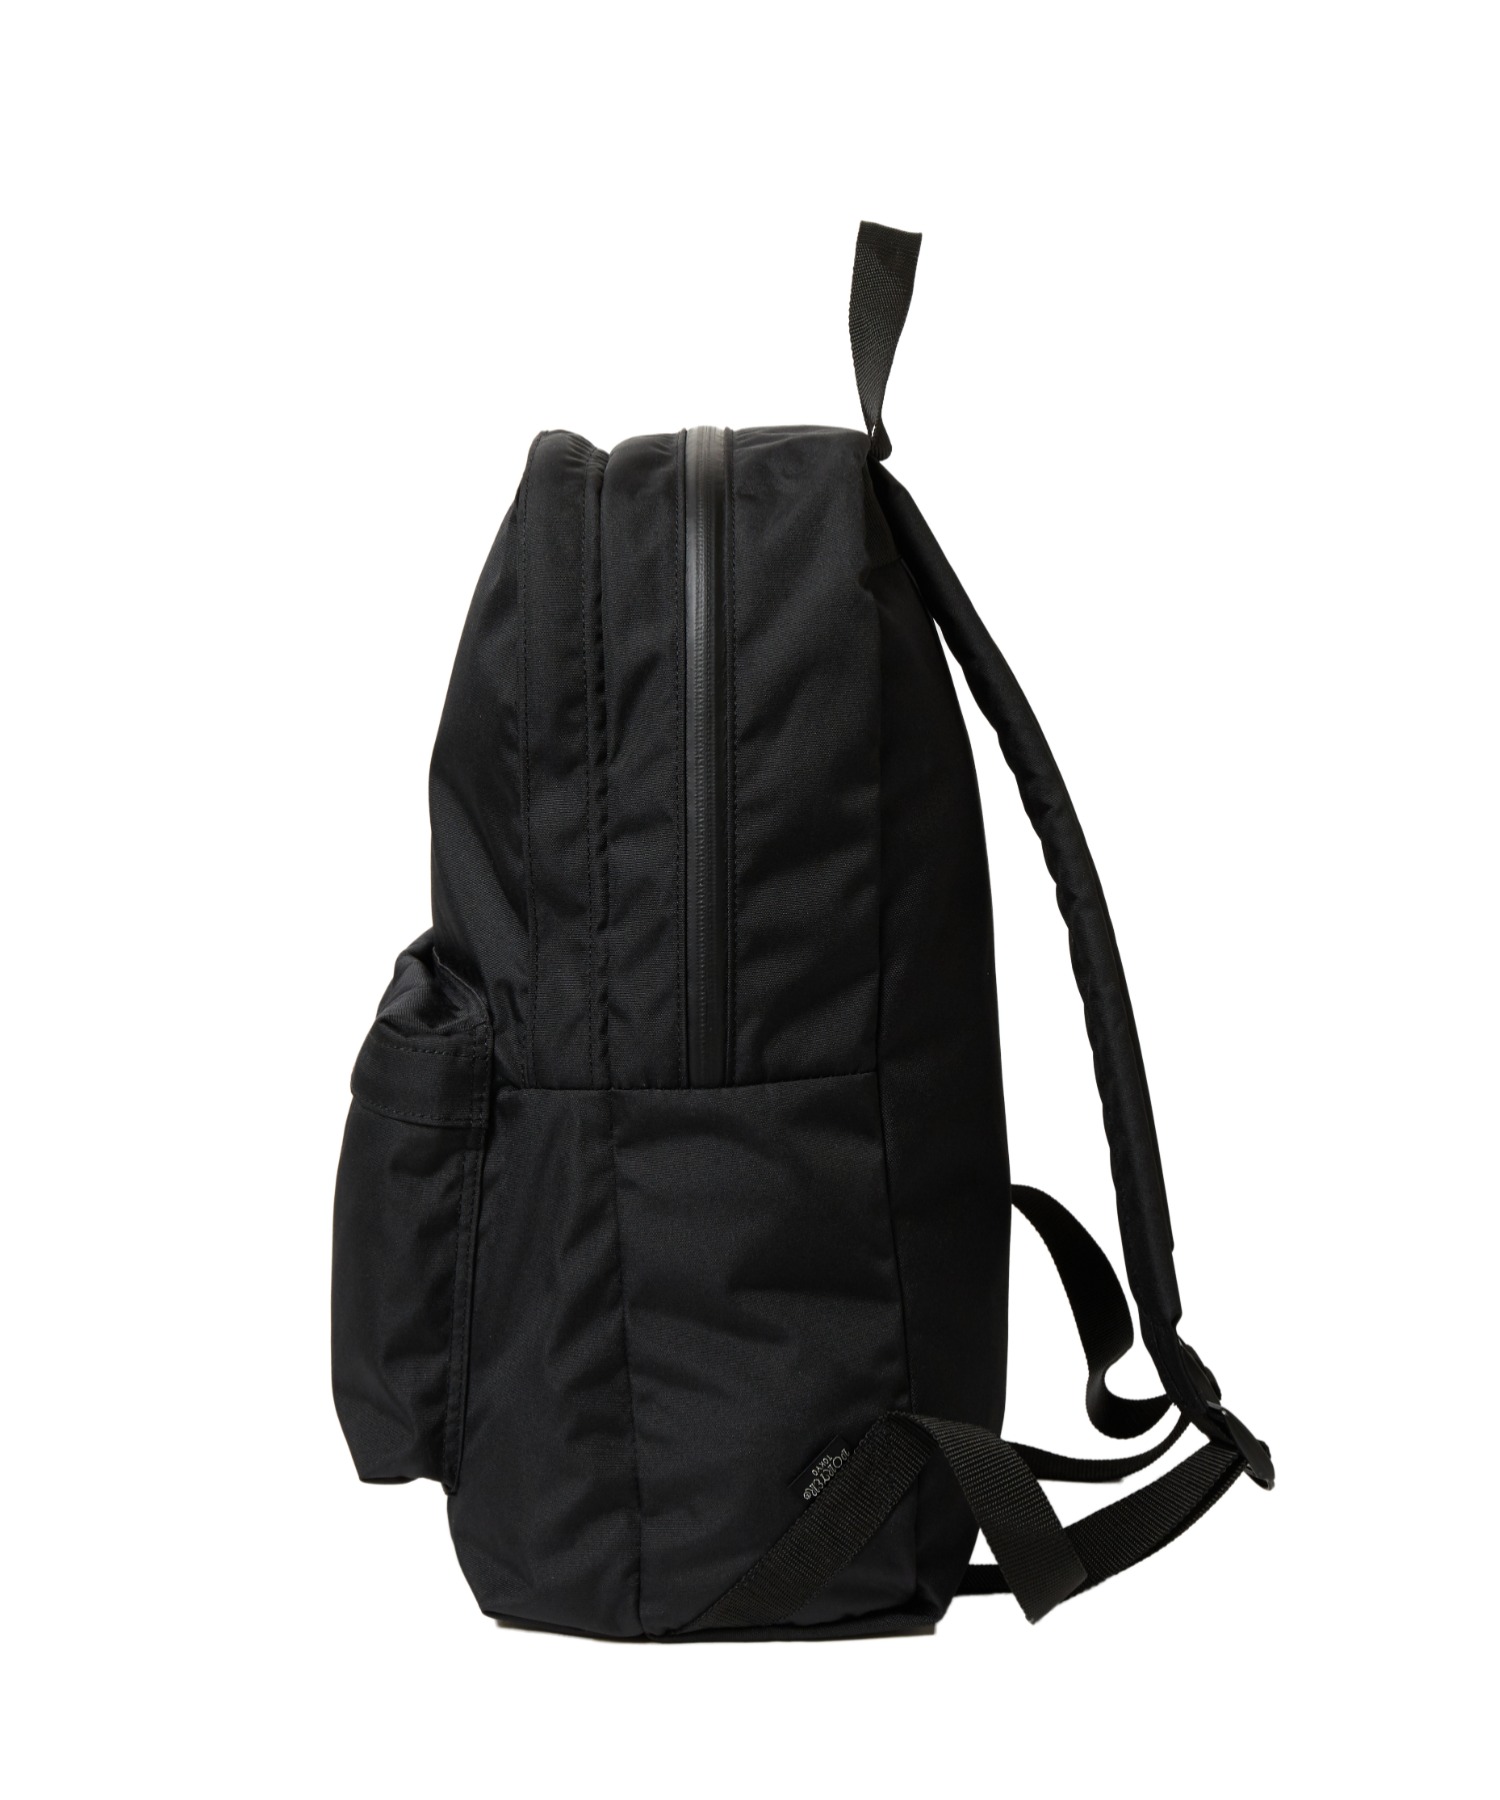 BACK PACK (SMALL) 【N.HOOLYWOOD COMPILE × PORTER】 N.HOOLYWOOD 